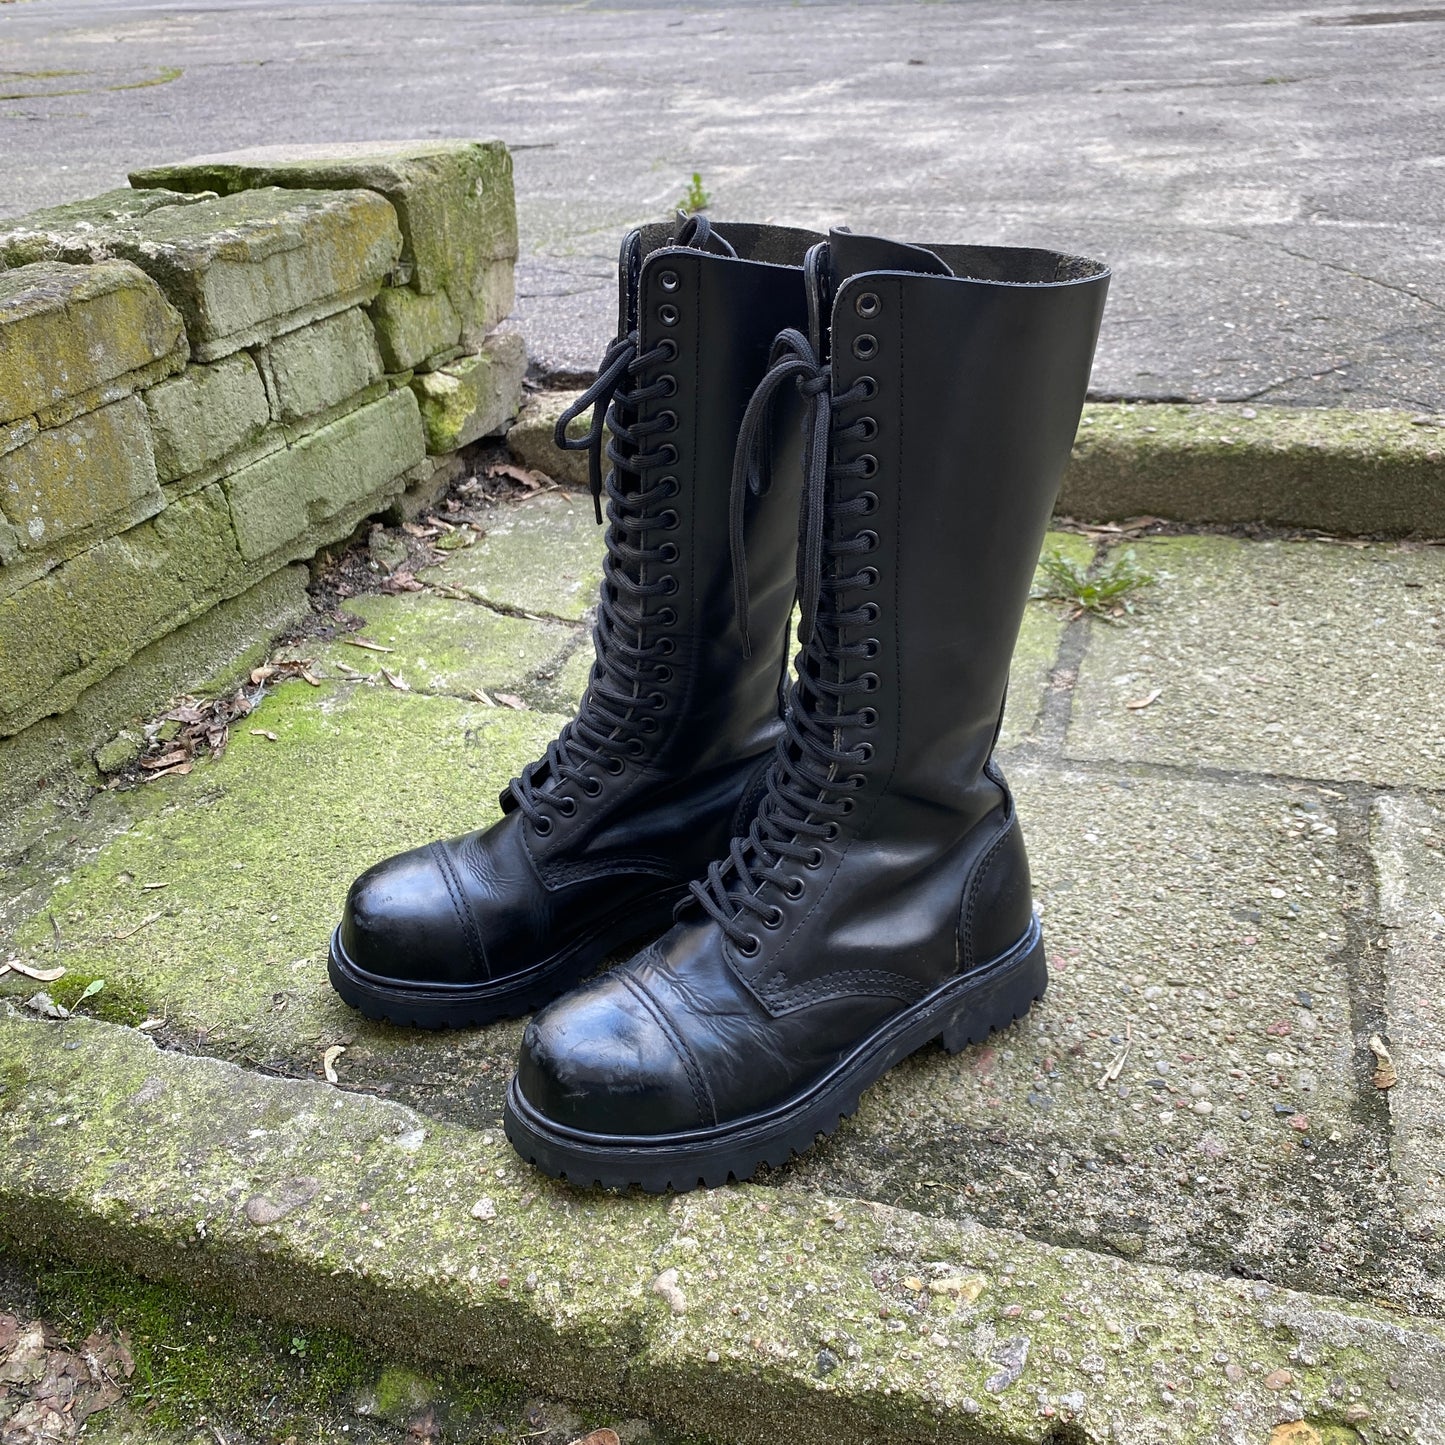 Undercover England combat boots 20 holes  - 39.5